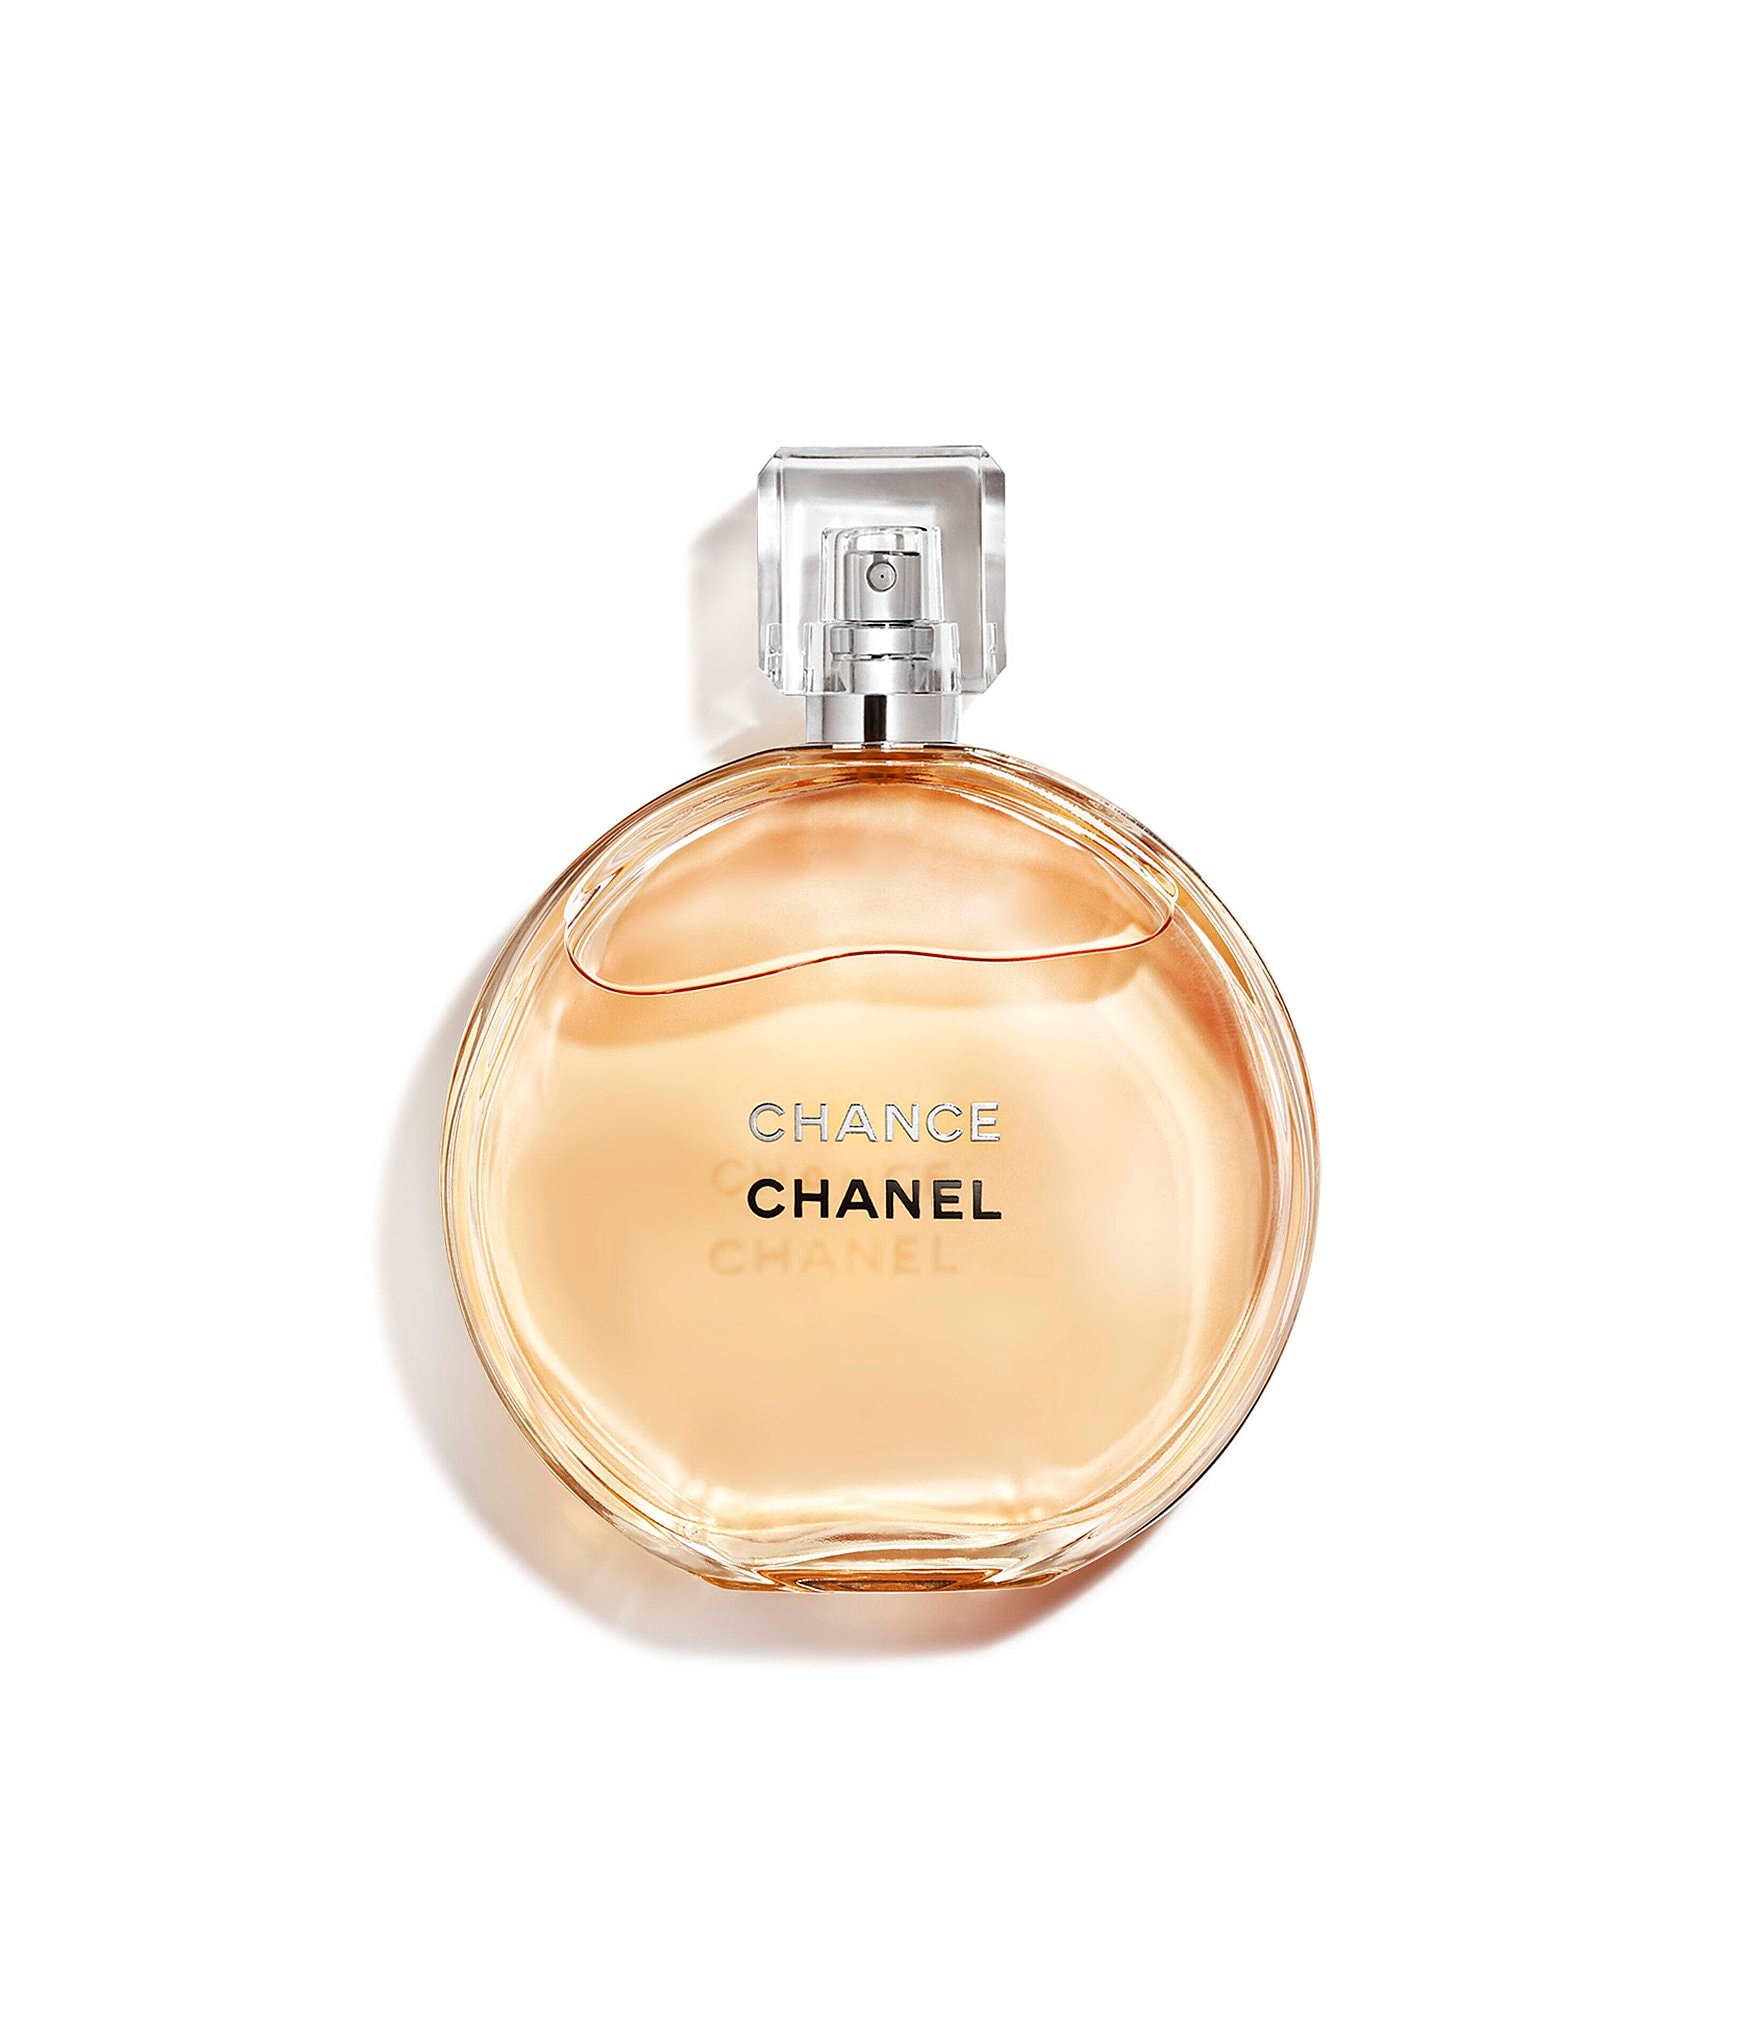 Chanel Launched Moisturizing, Fragrant Chance Eau Tendre Body Creams